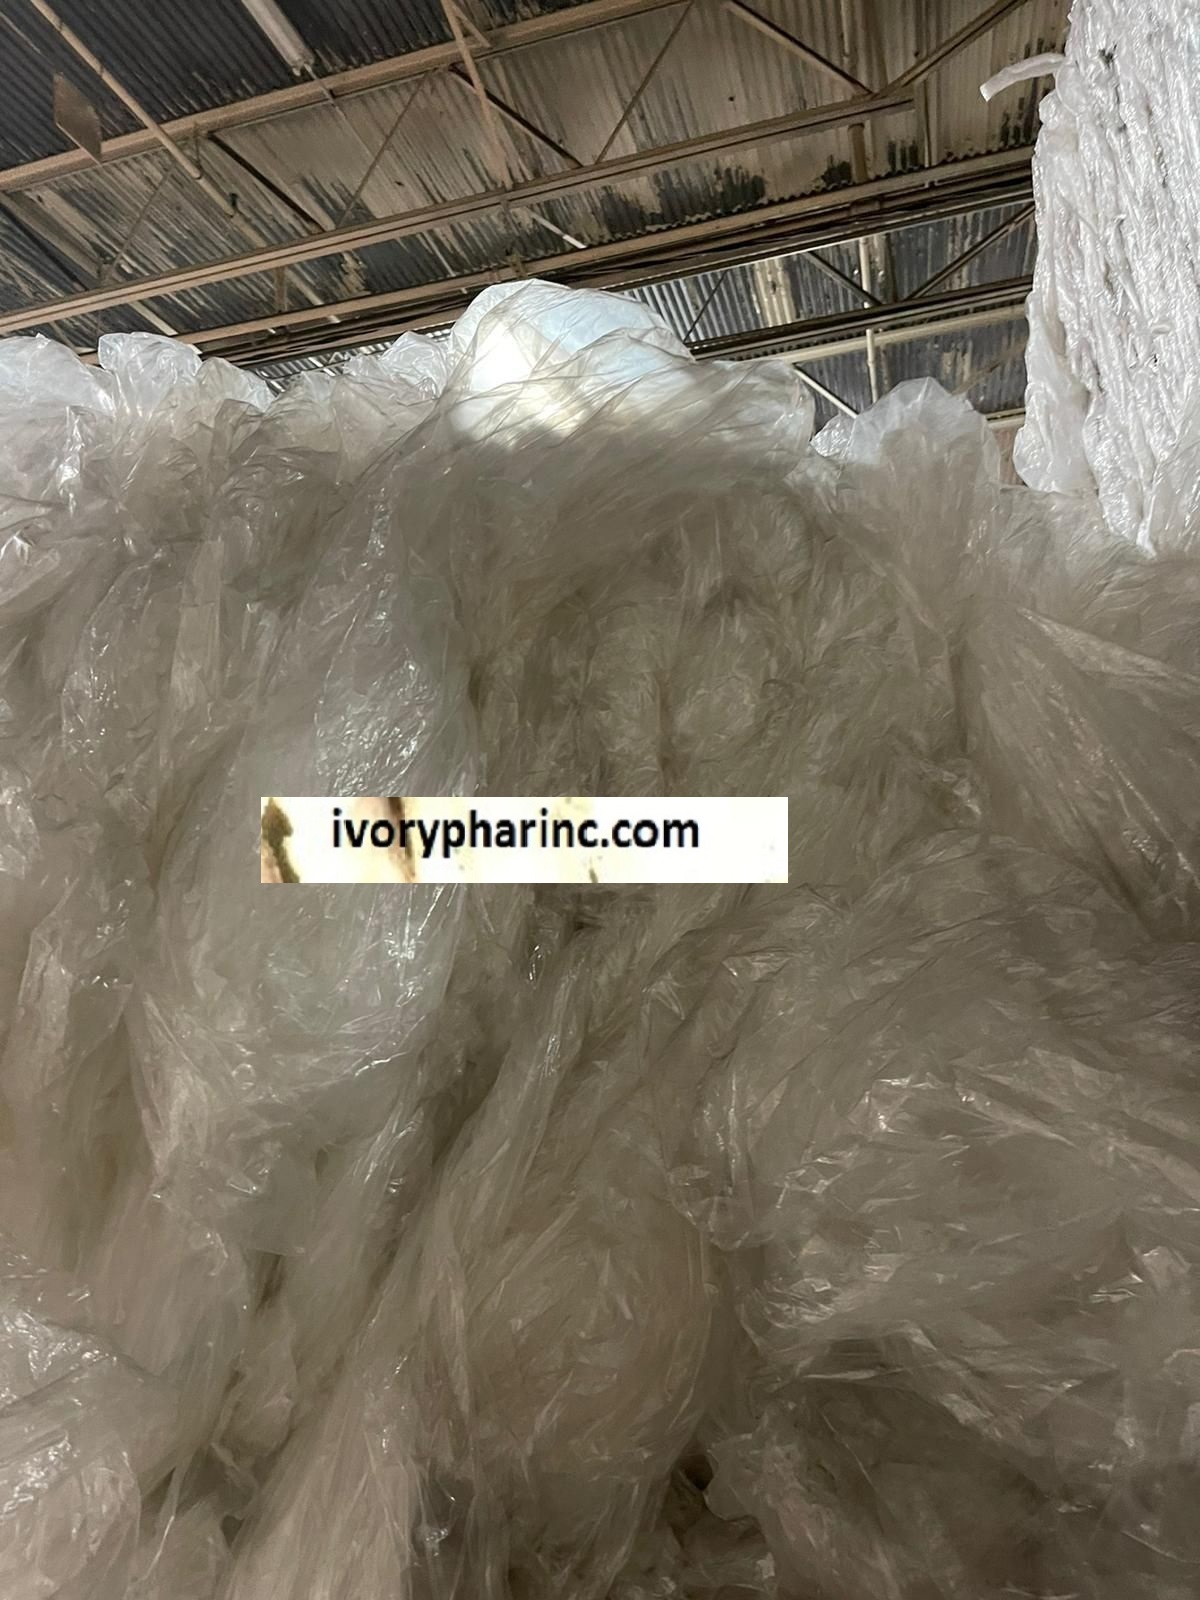 HDPE/LDPE/LLDPE Film roll scrap for sale, Bale